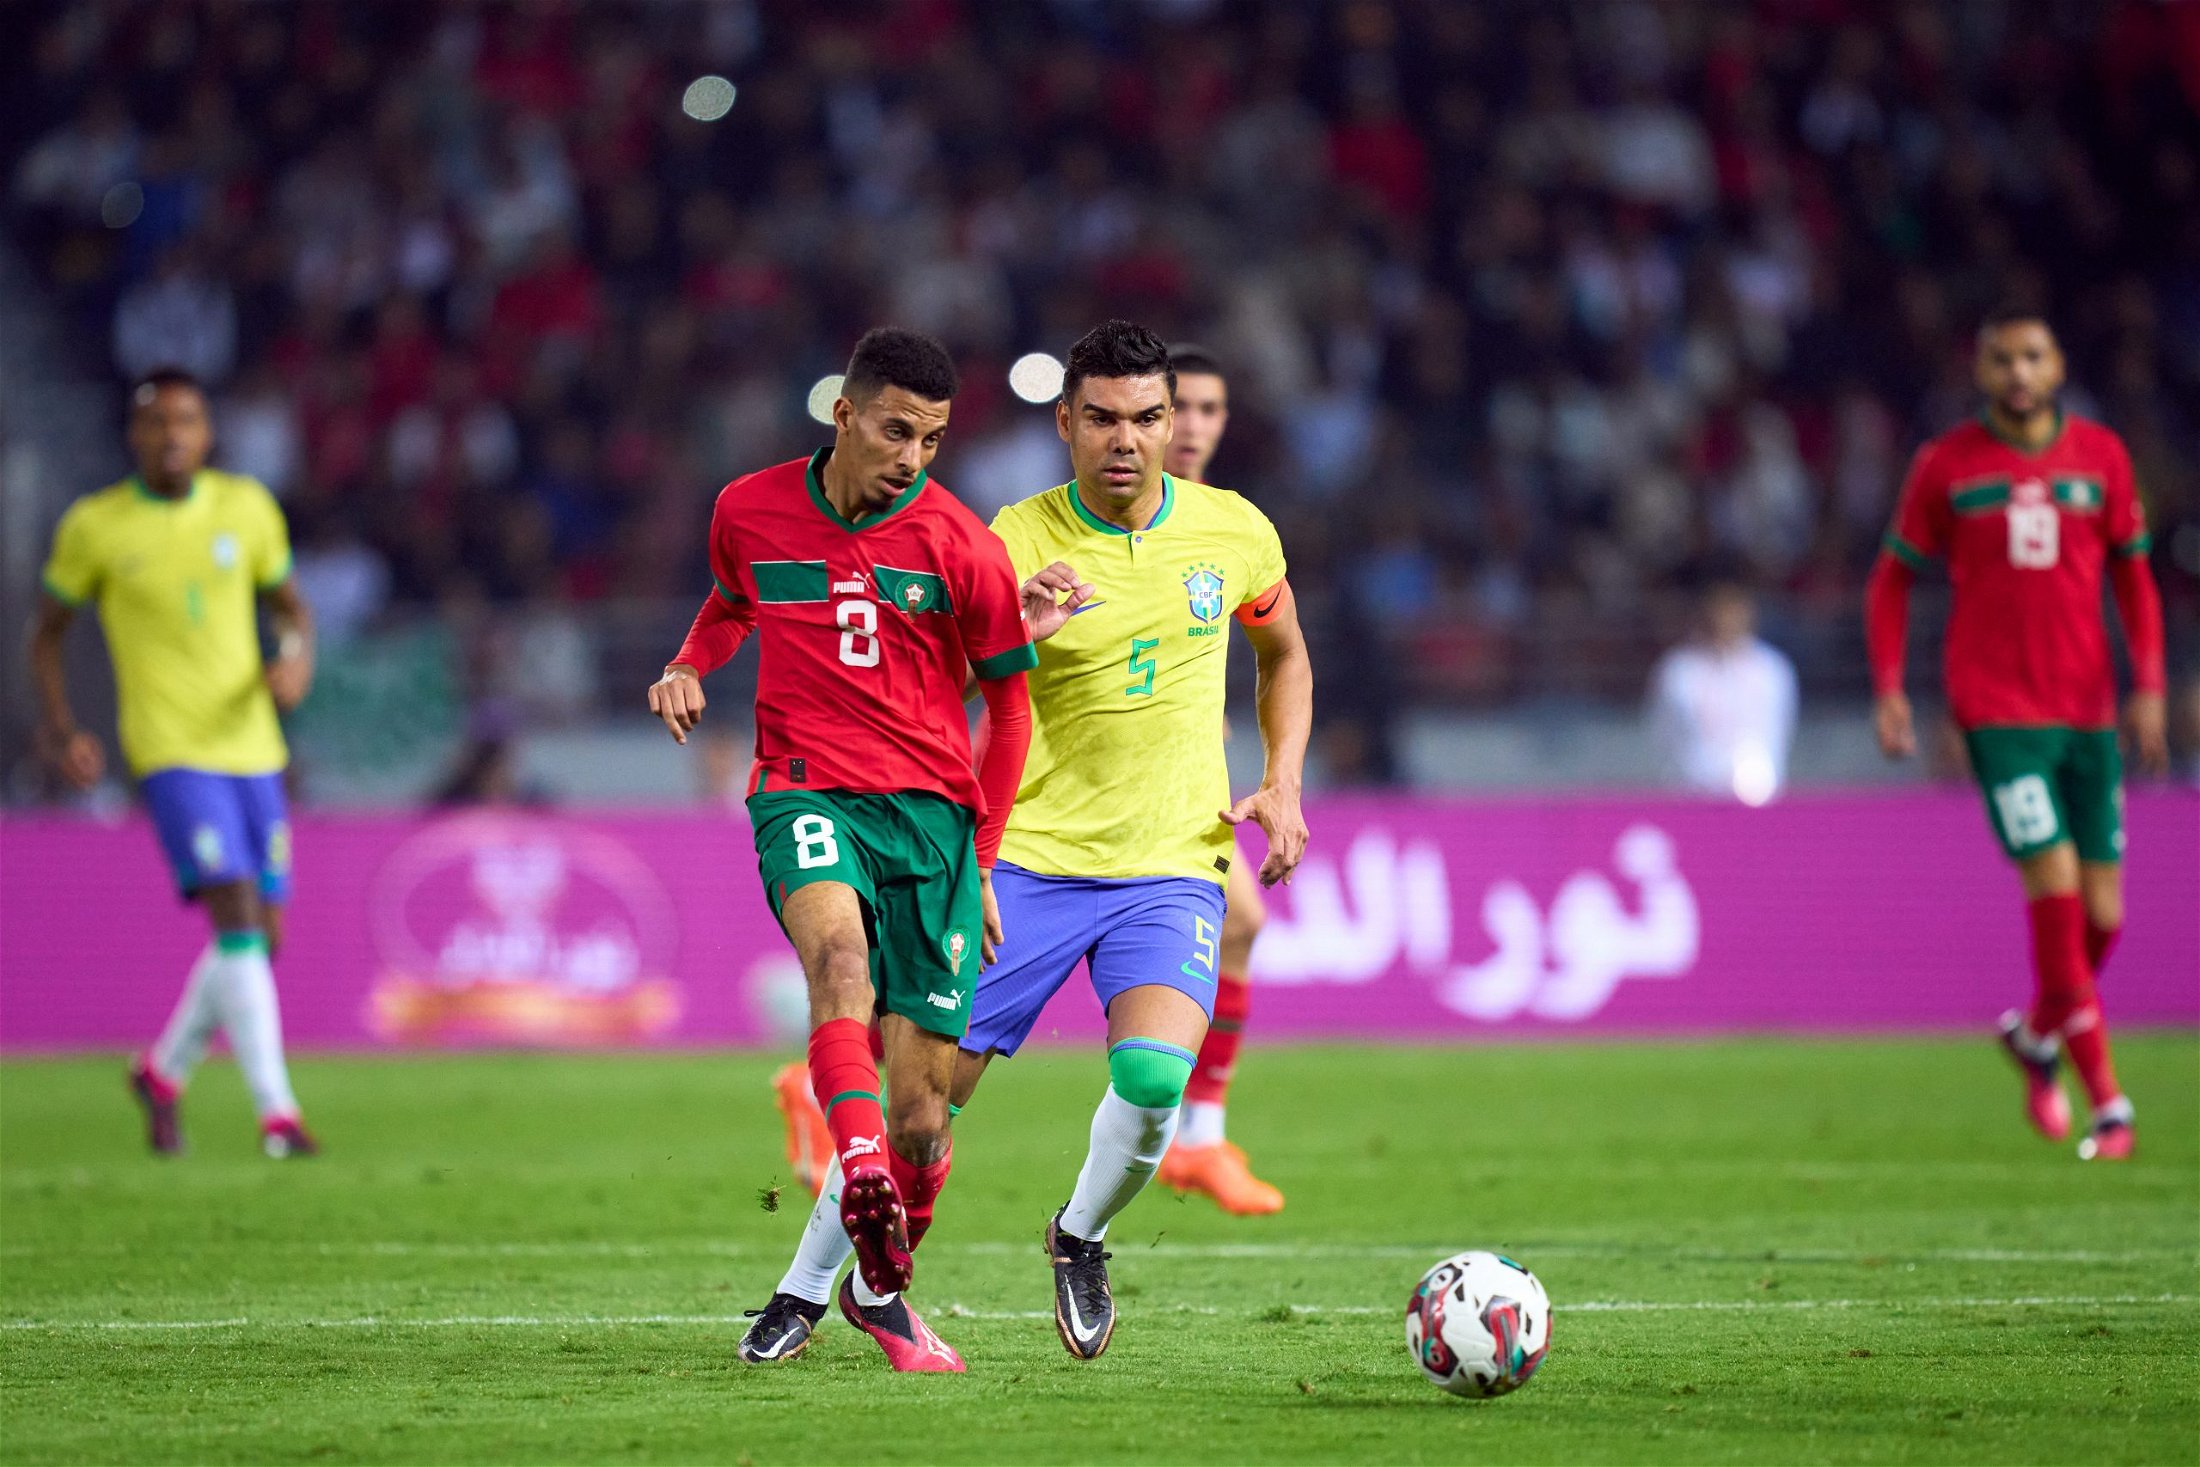  A photo of a soccer match between Morocco and Brazil with the caption 'Leeds United transfer spending financial maneuvering'.